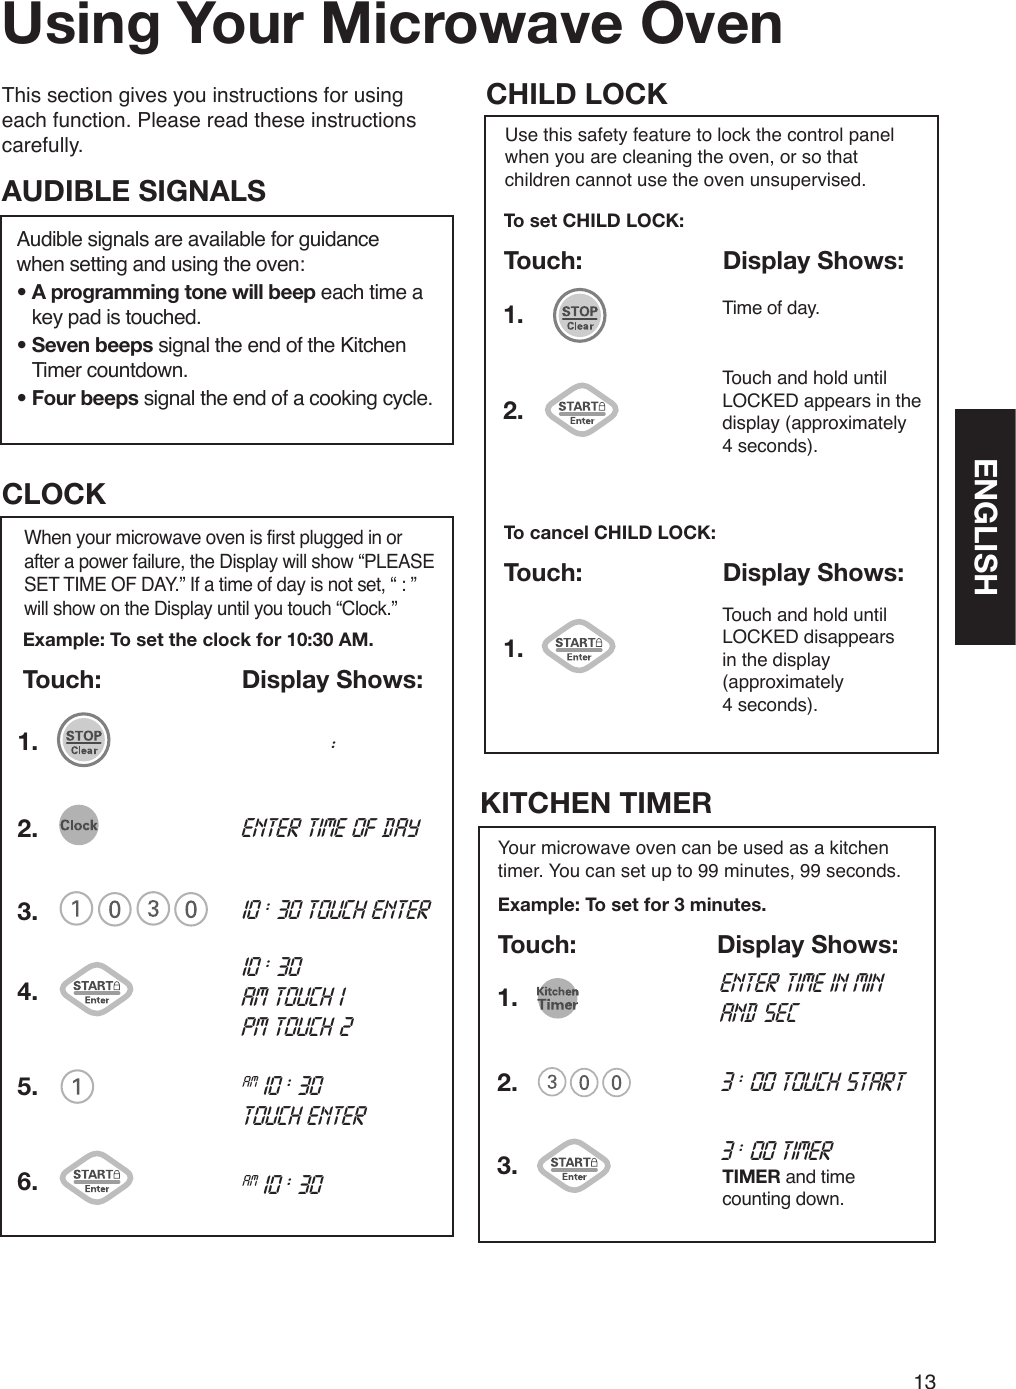 13This section gives you instructions for using each function. Please read these instructions carefully.Using Your Microwave OvenAudible signals are available for guidance  when setting and using the oven:•  A programming tone will beep each time a key pad is touched.•  Seven beeps signal the end of the Kitchen Timer countdown.•  Four beeps signal the end of a cooking cycle.AUDIBLE SIGNALSExample: To set the clock for 10:30 AM.Touch:  Display Shows:When your microwave oven is first plugged in or after a power failure, the Display will show “PLEASE SET TIME OF DAY.” If a time of day is not set, “ : ” will show on the Display until you touch “Clock.”CLOCK1.2.3. 10 : 30 touch enterenter time of day10 : 30 am touch 1   pm touch 24.am 10 : 30 touch enter 5.am 10 : 30 6.    :Use this safety feature to lock the control panel when you are cleaning the oven, or so that children cannot use the oven unsupervised.To set CHILD LOCK:Touch:  Display Shows:CHILD LOCKTouch and hold until LOCKED appears in the display (approximately  4 seconds).To cancel CHILD LOCK:Touch:  Display Shows:Time of day.1.1.2.Touch and hold until LOCKED disappears in the display (approximately  4 seconds).enter time in min and sec3 : 00 touch startYour microwave oven can be used as a kitchen timer. You can set up to 99 minutes, 99 seconds.Example: To set for 3 minutes.Touch:  Display Shows:KITCHEN TIMER3 : 00 timerTIMER and time counting down.1.2.3.ENGLISH